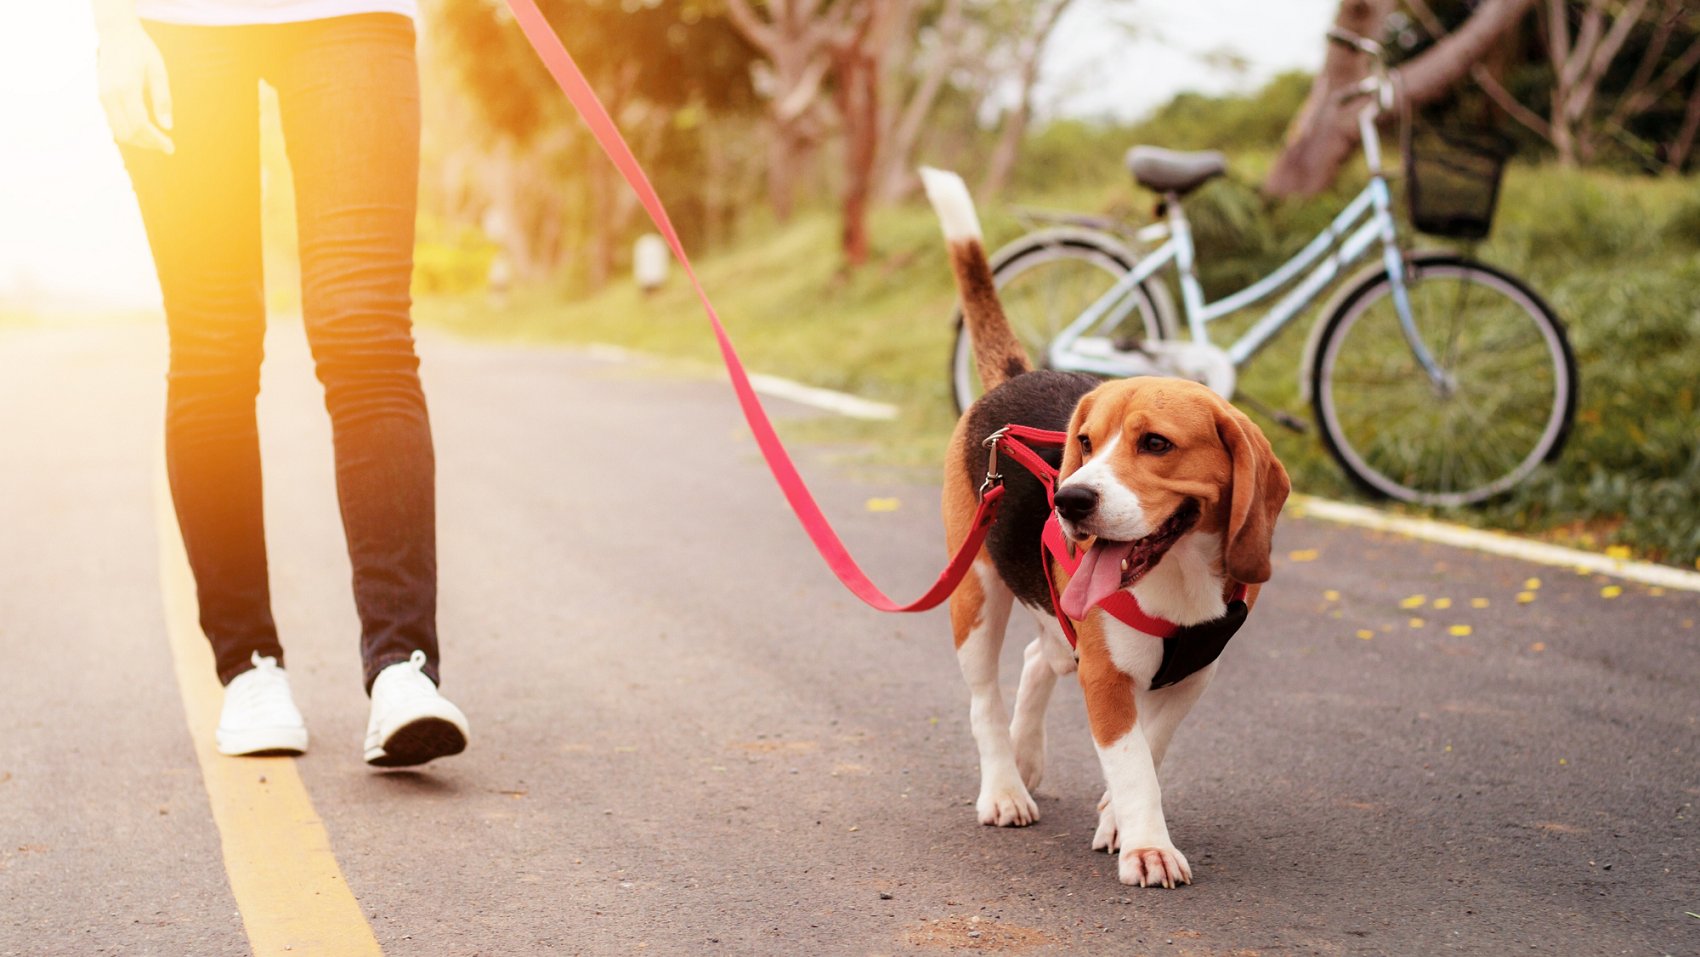 Stock image of a person walking their dog on a paved path.